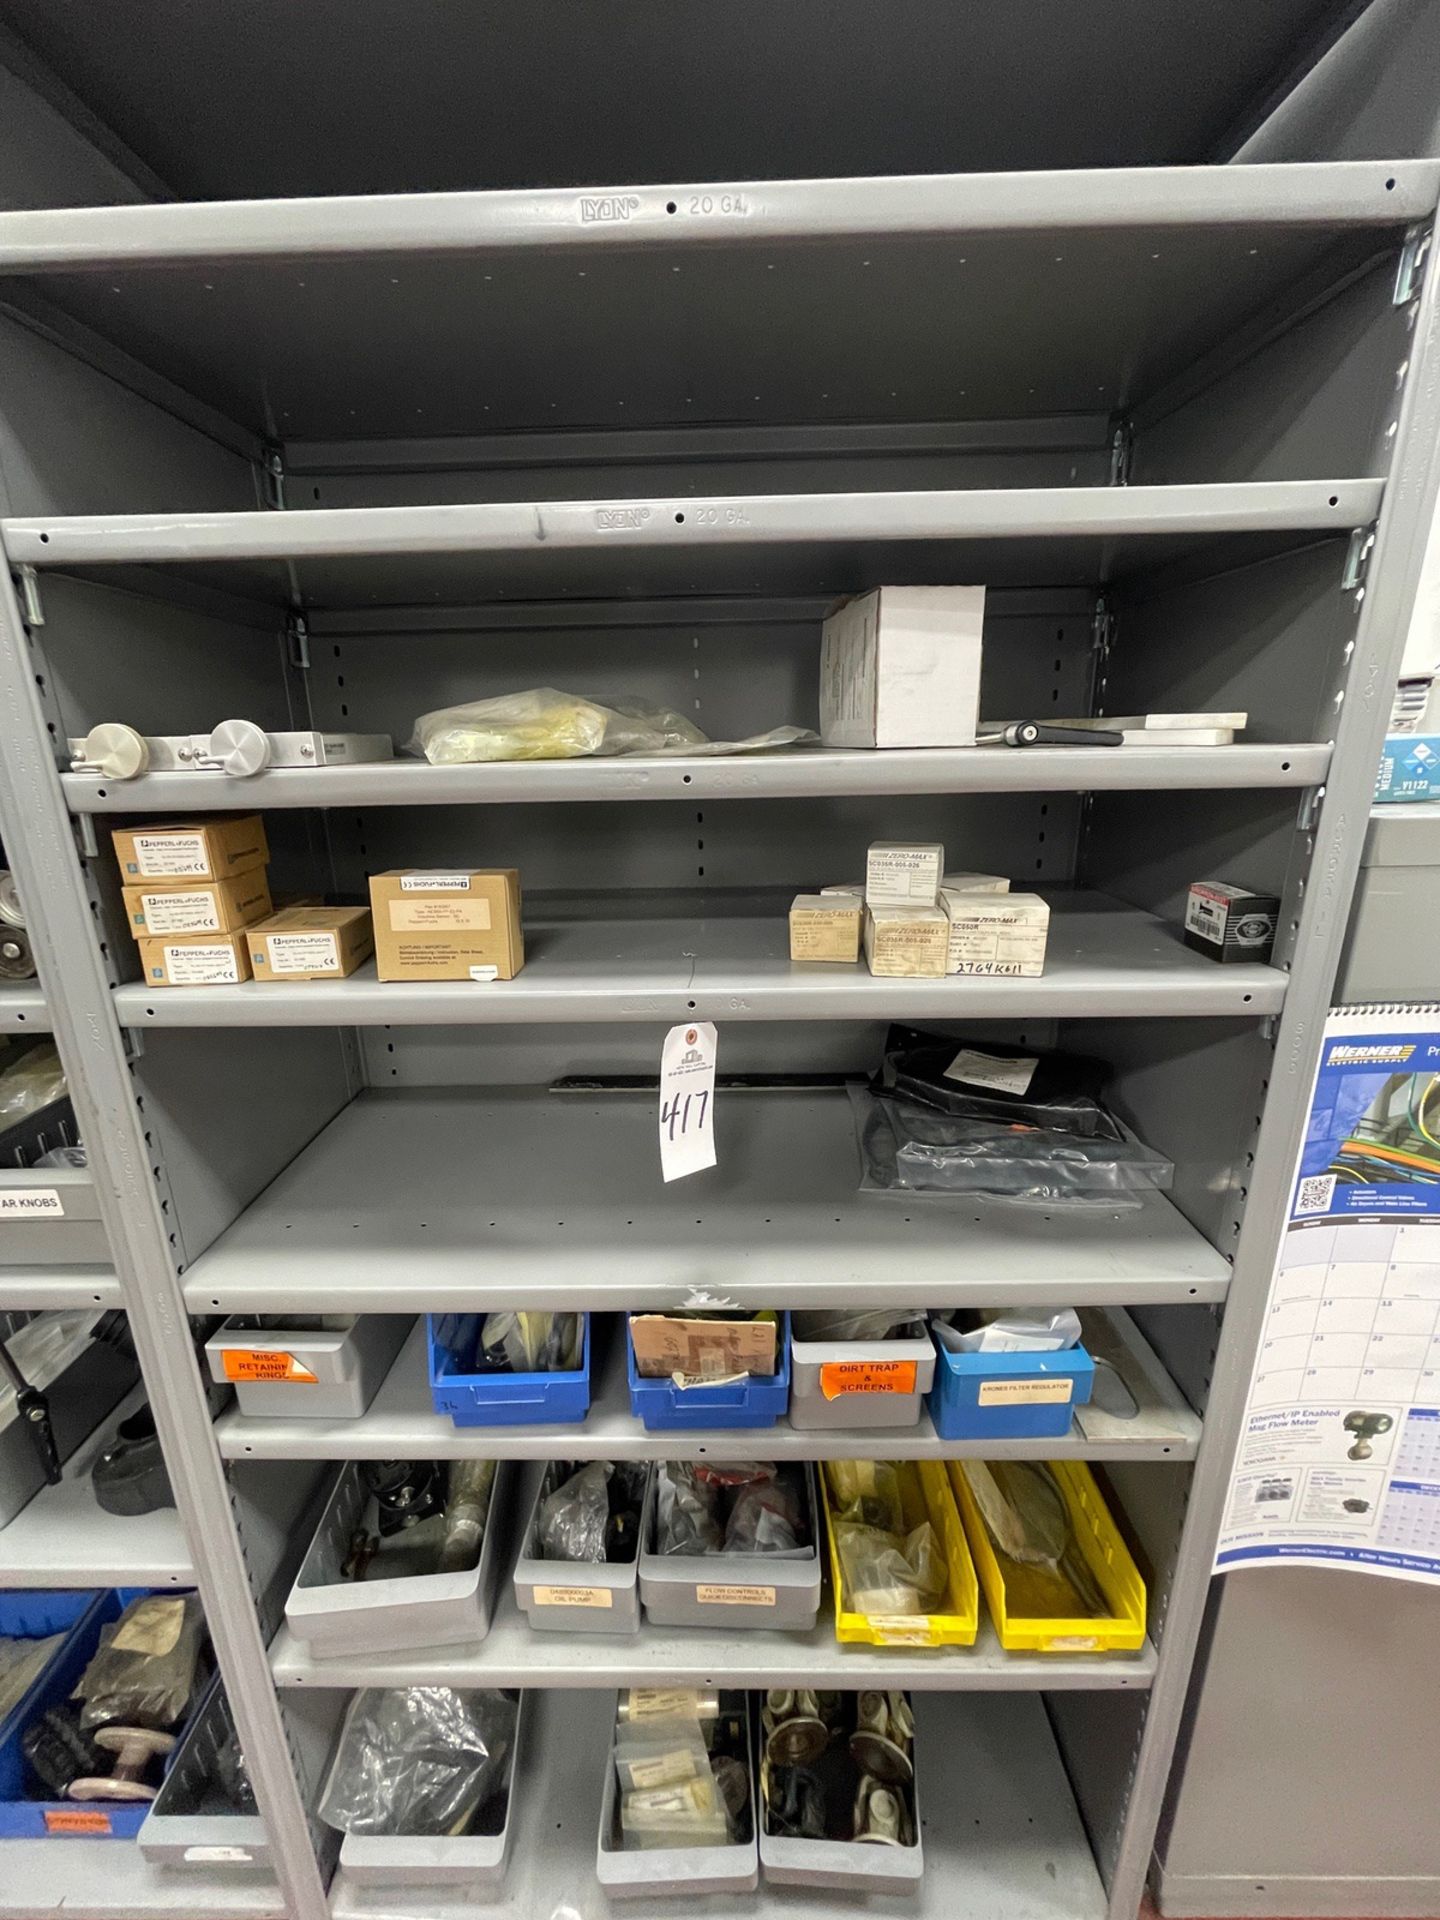 Contents of Storage Shelf Section, Spare Parts | Rig Fee $175